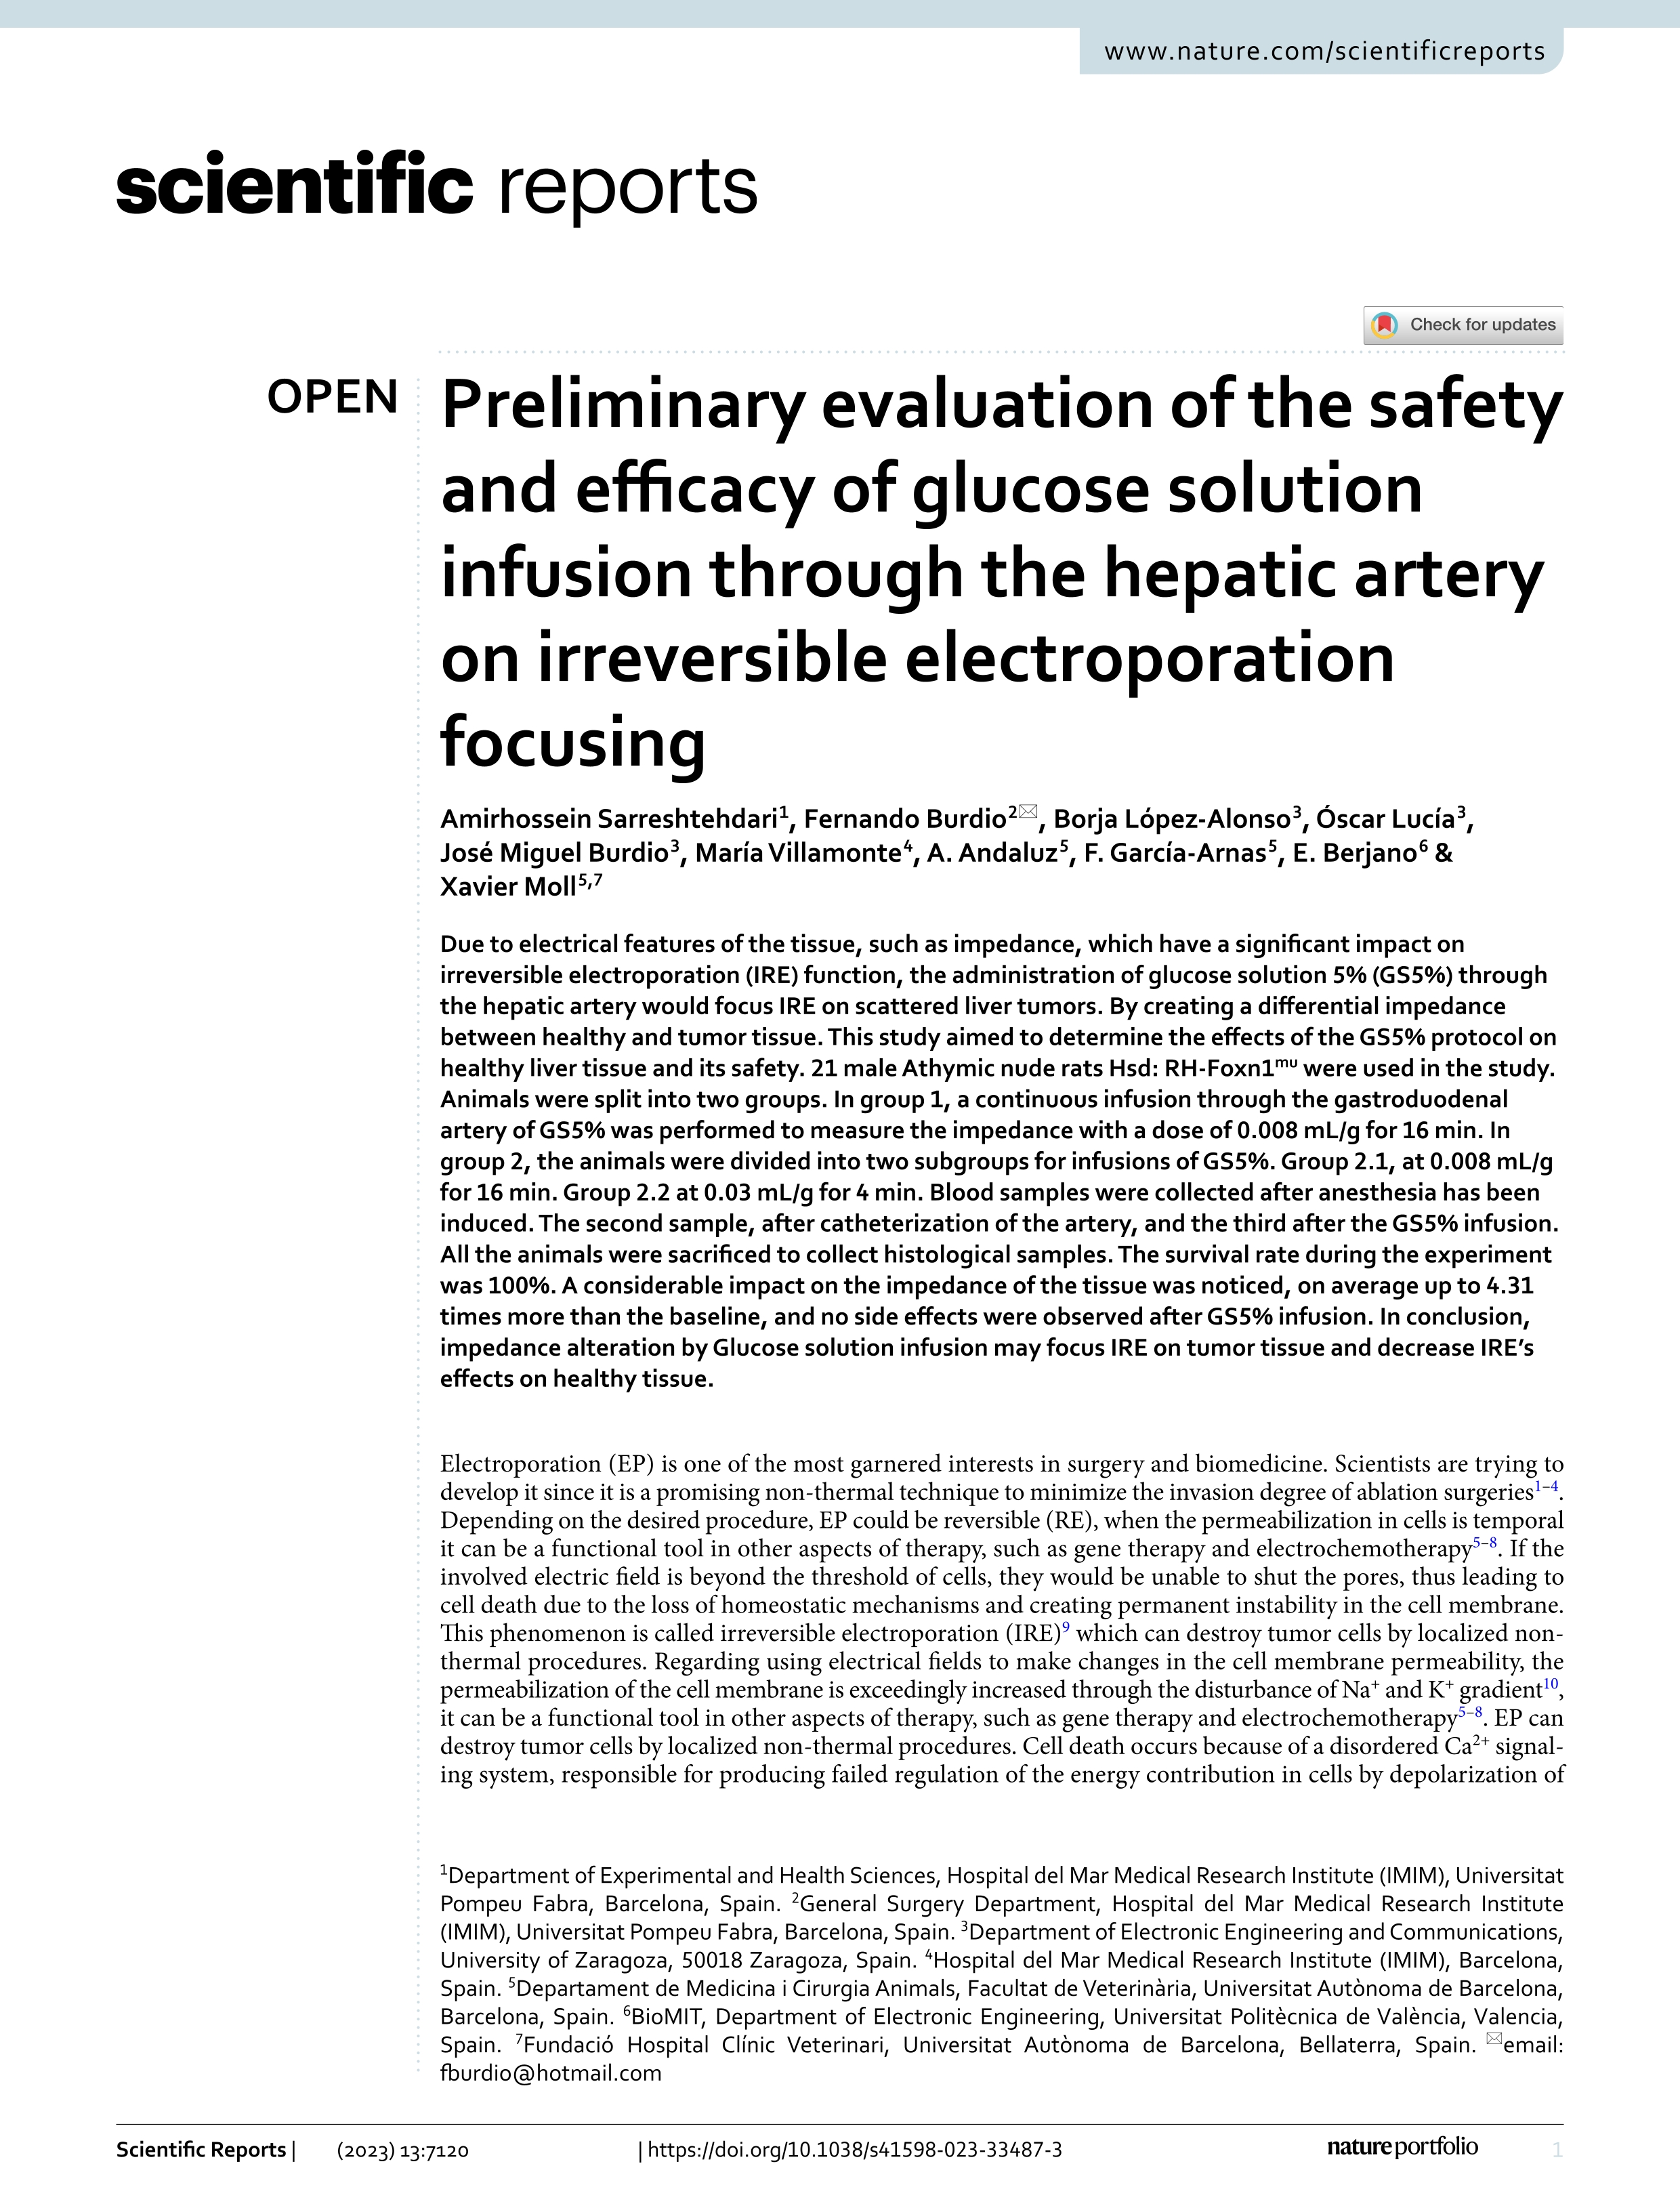 Preliminary evaluation of the safety and efficacy of glucose solution infusion through the hepatic artery on irreversible electroporation focusing